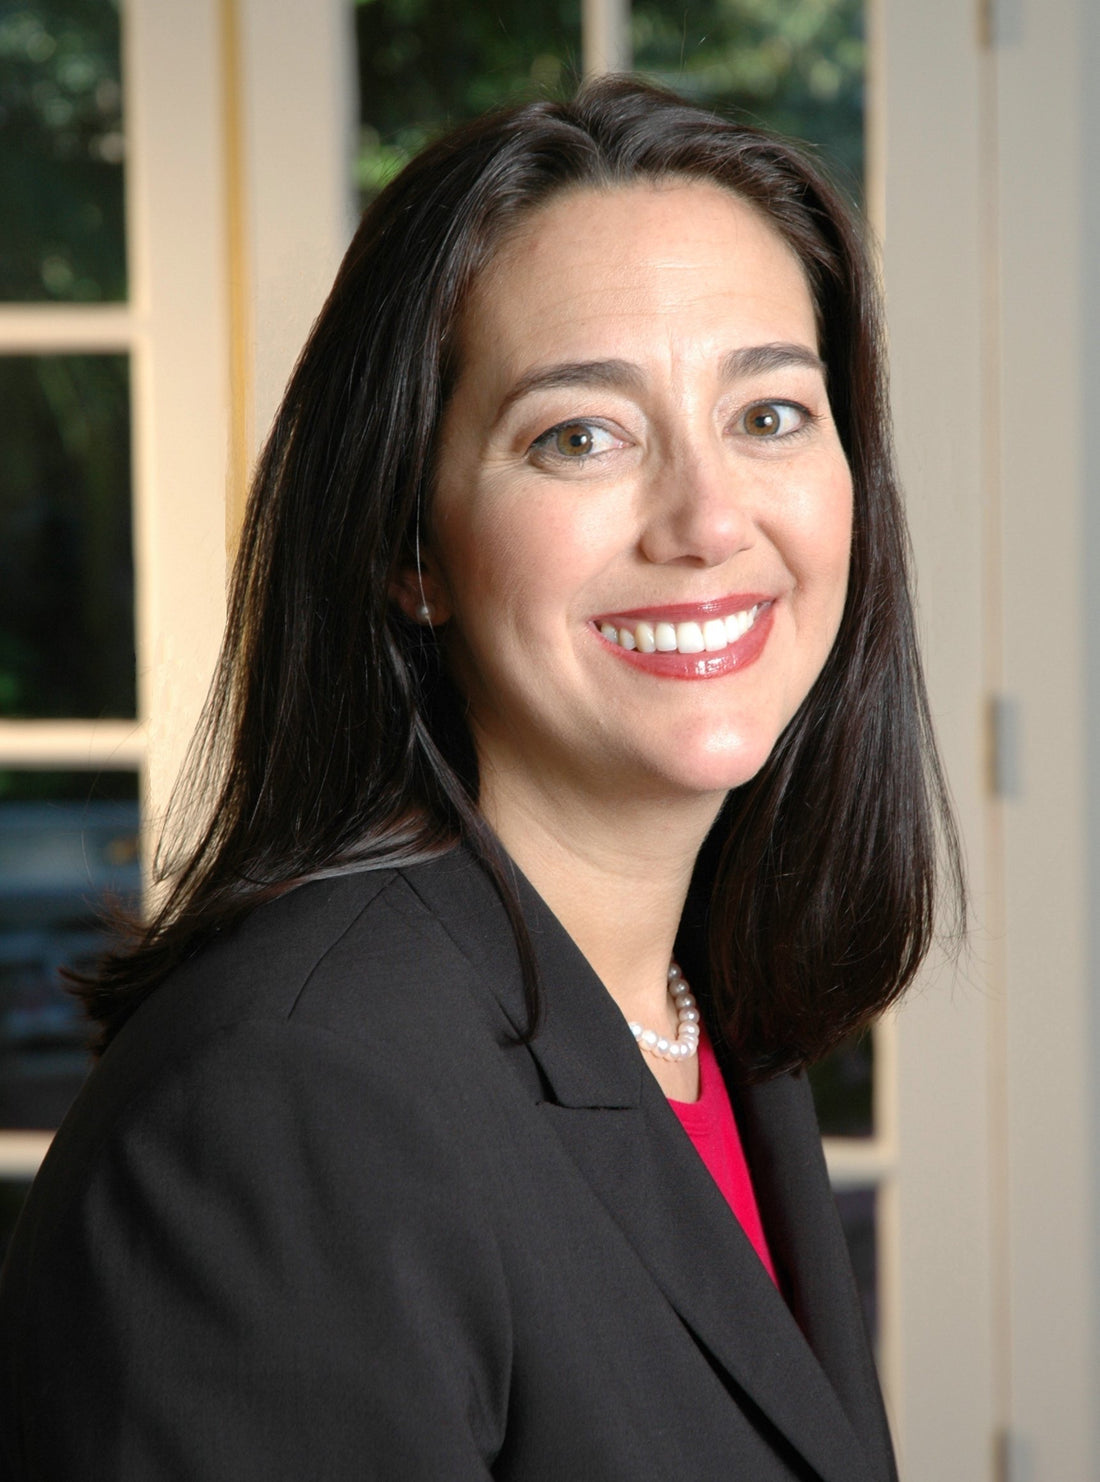 Podcast Episode 011 : A toast for change with Erin Gruwell